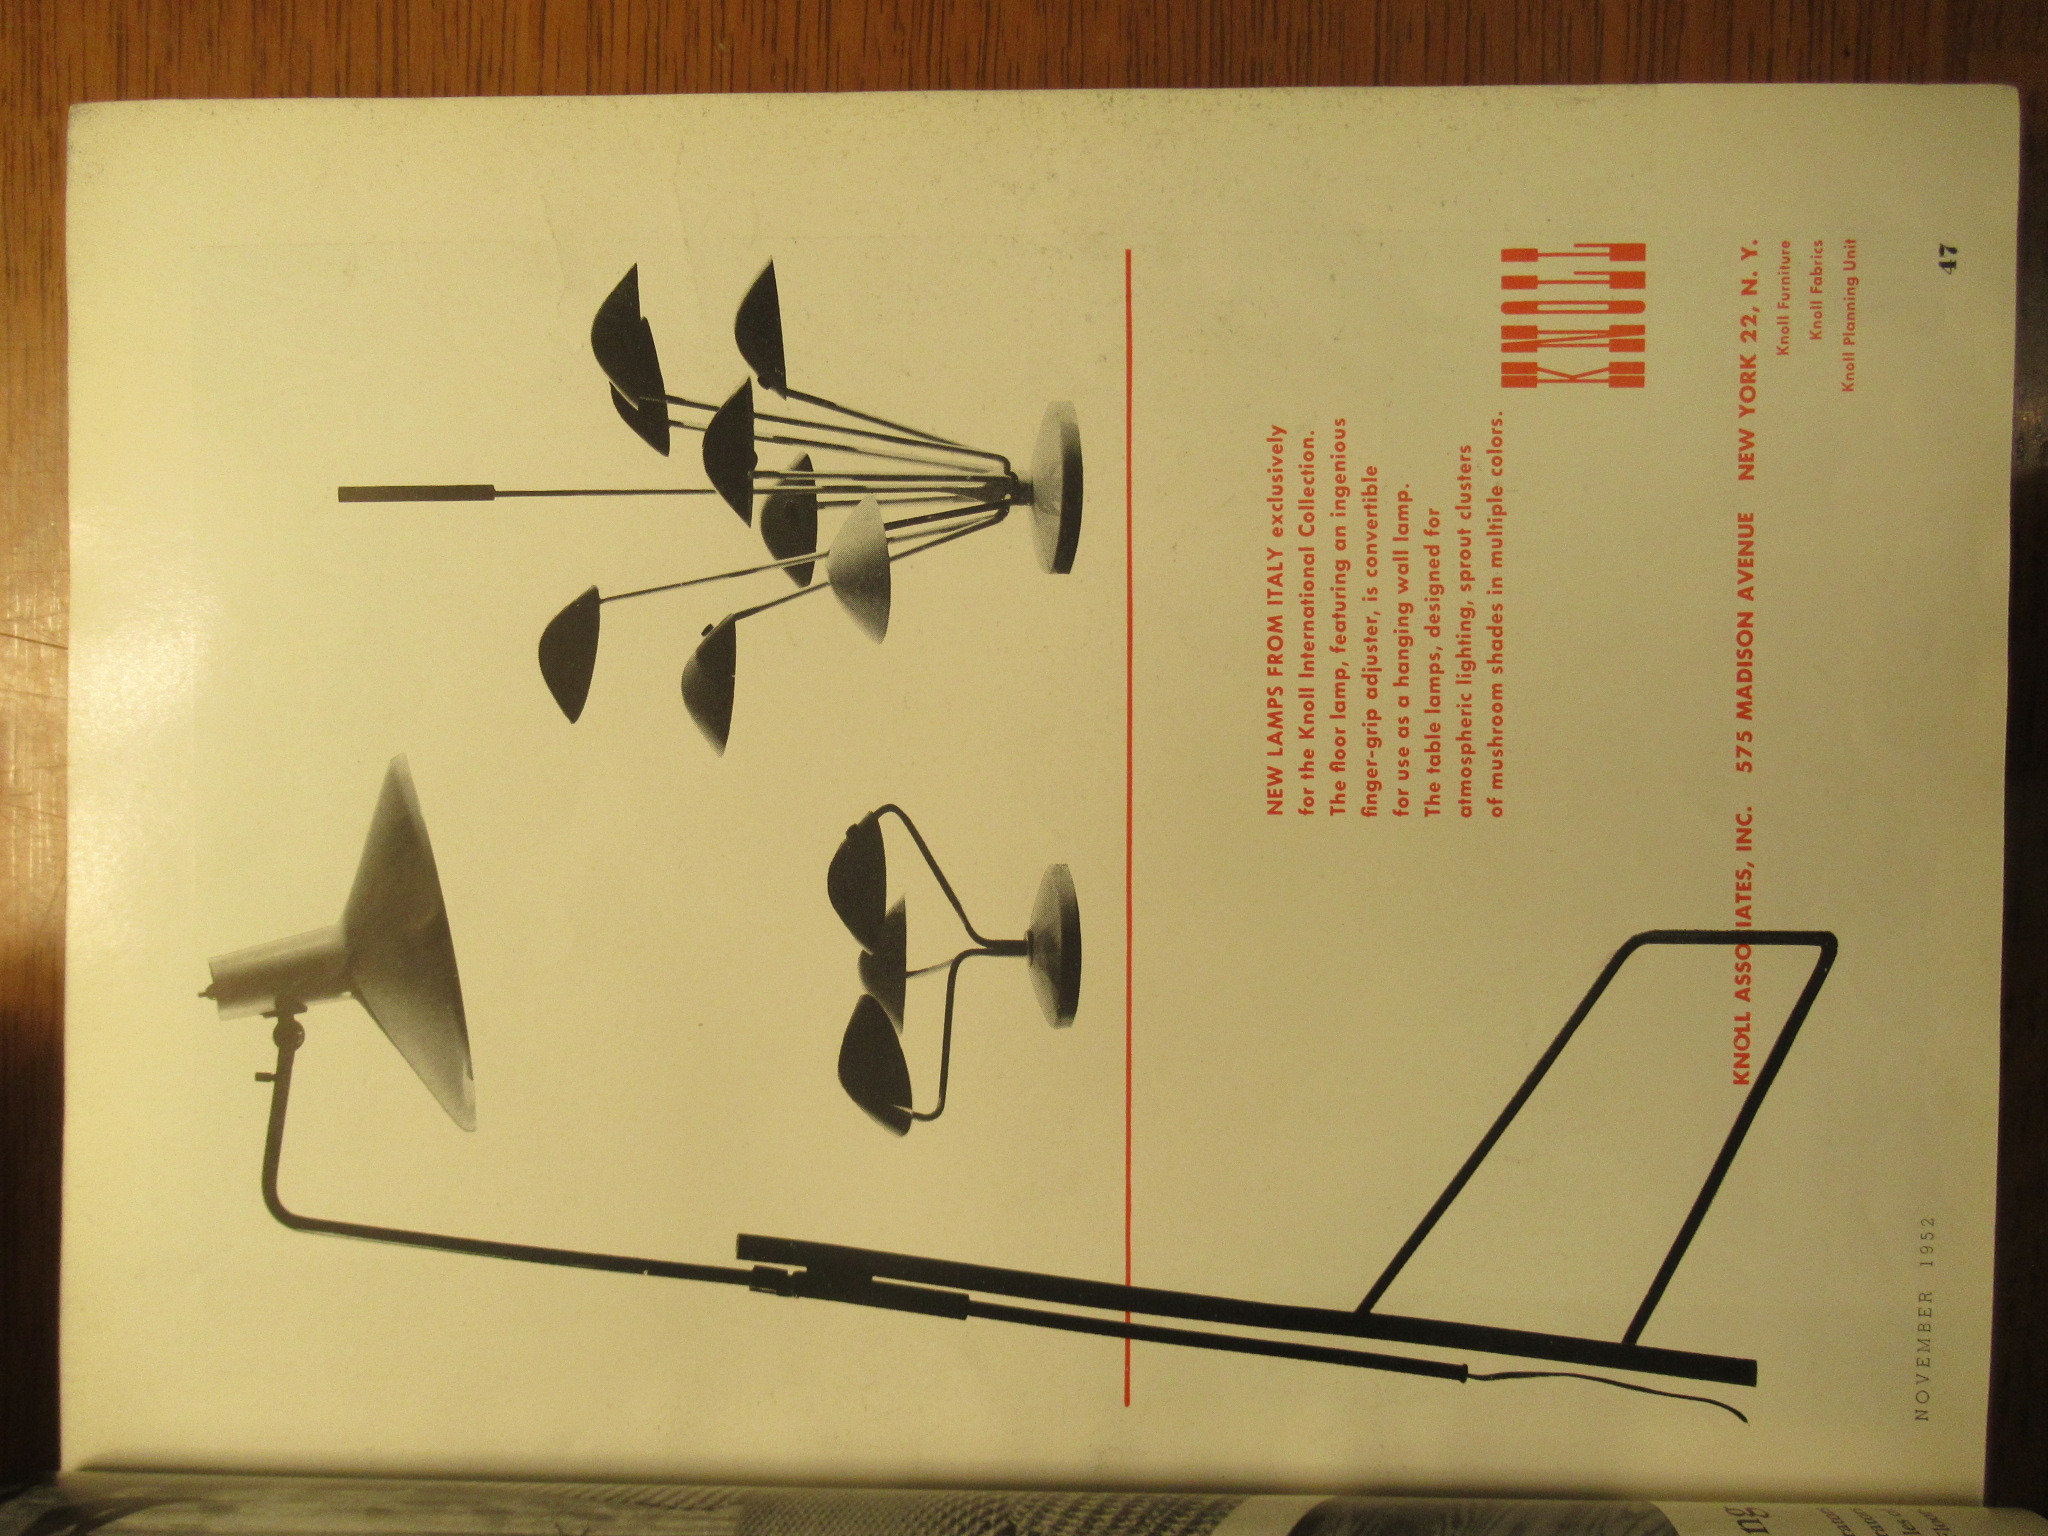 New lamps from Italy, November 1952